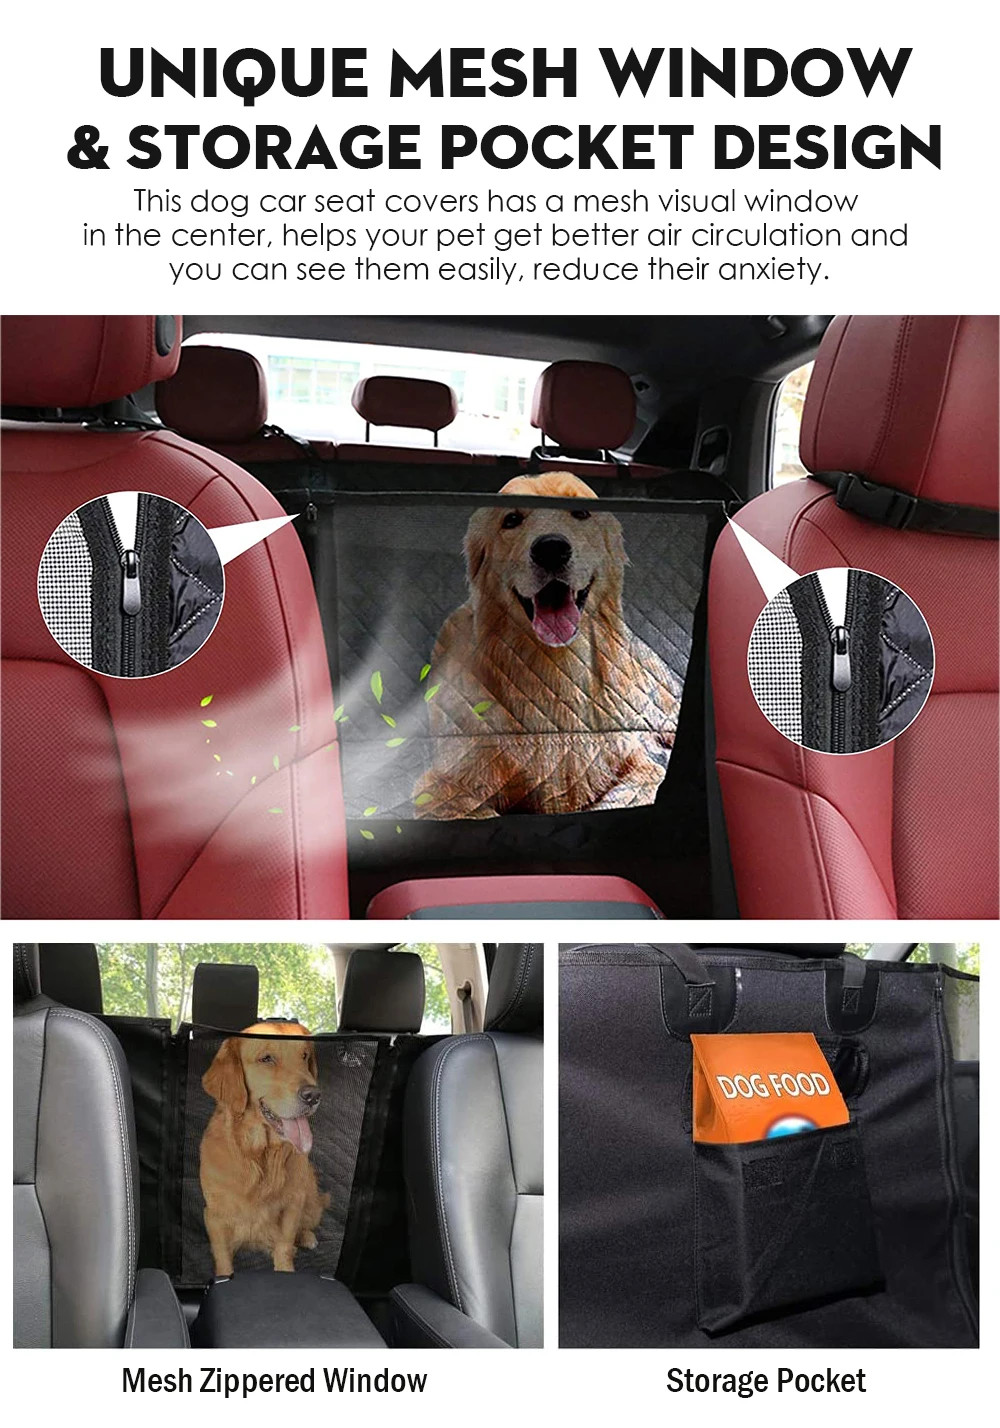 Dog Car Seat Cover Waterproof Pet Travel Dog Carrier Hammock Car Rear Back Seat Protector Mat Safety Carrier For Dogs